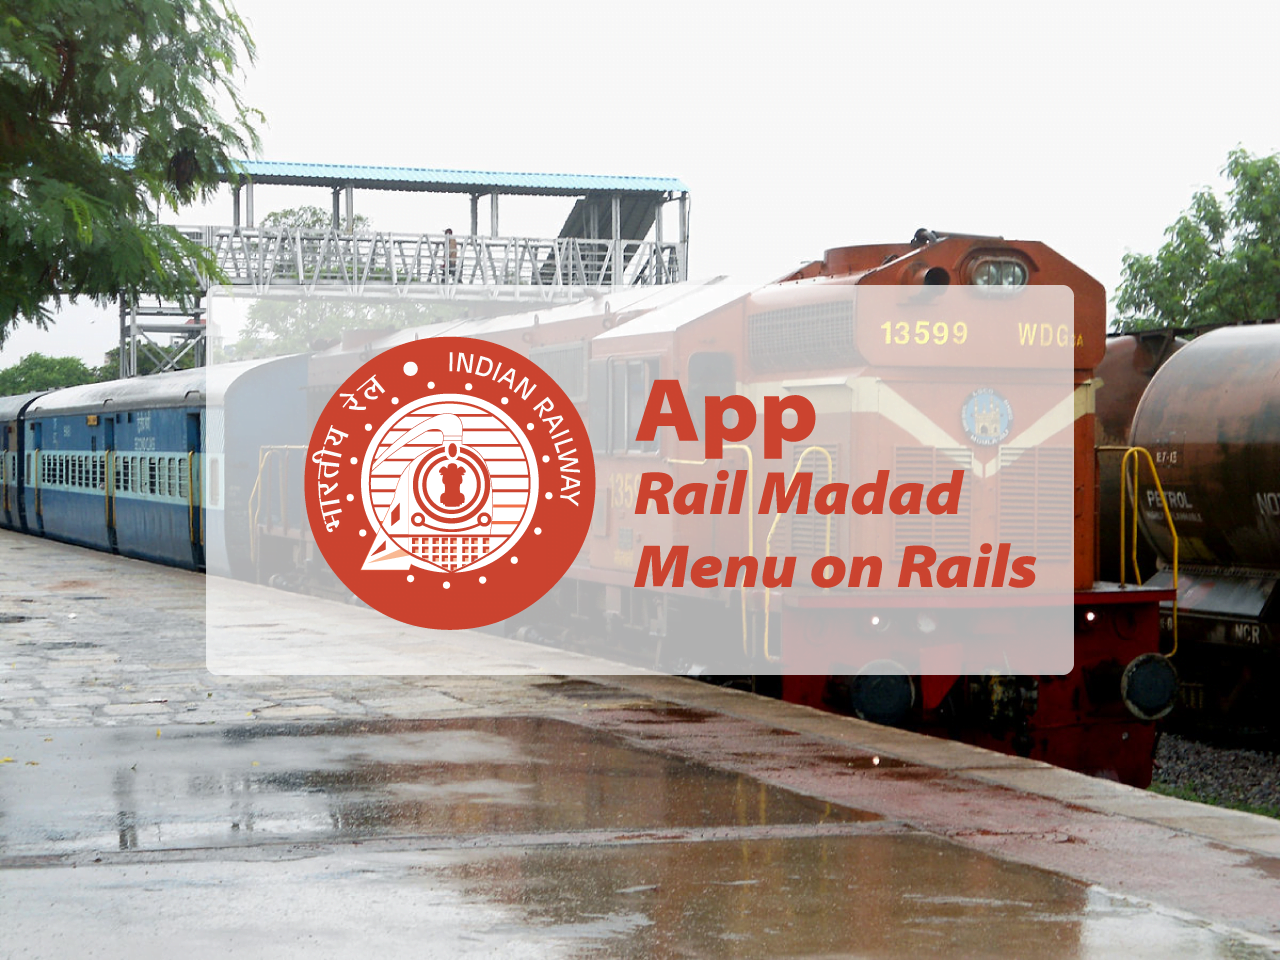 Indian Railway has Launched Rail Madad and Menu on Rails App